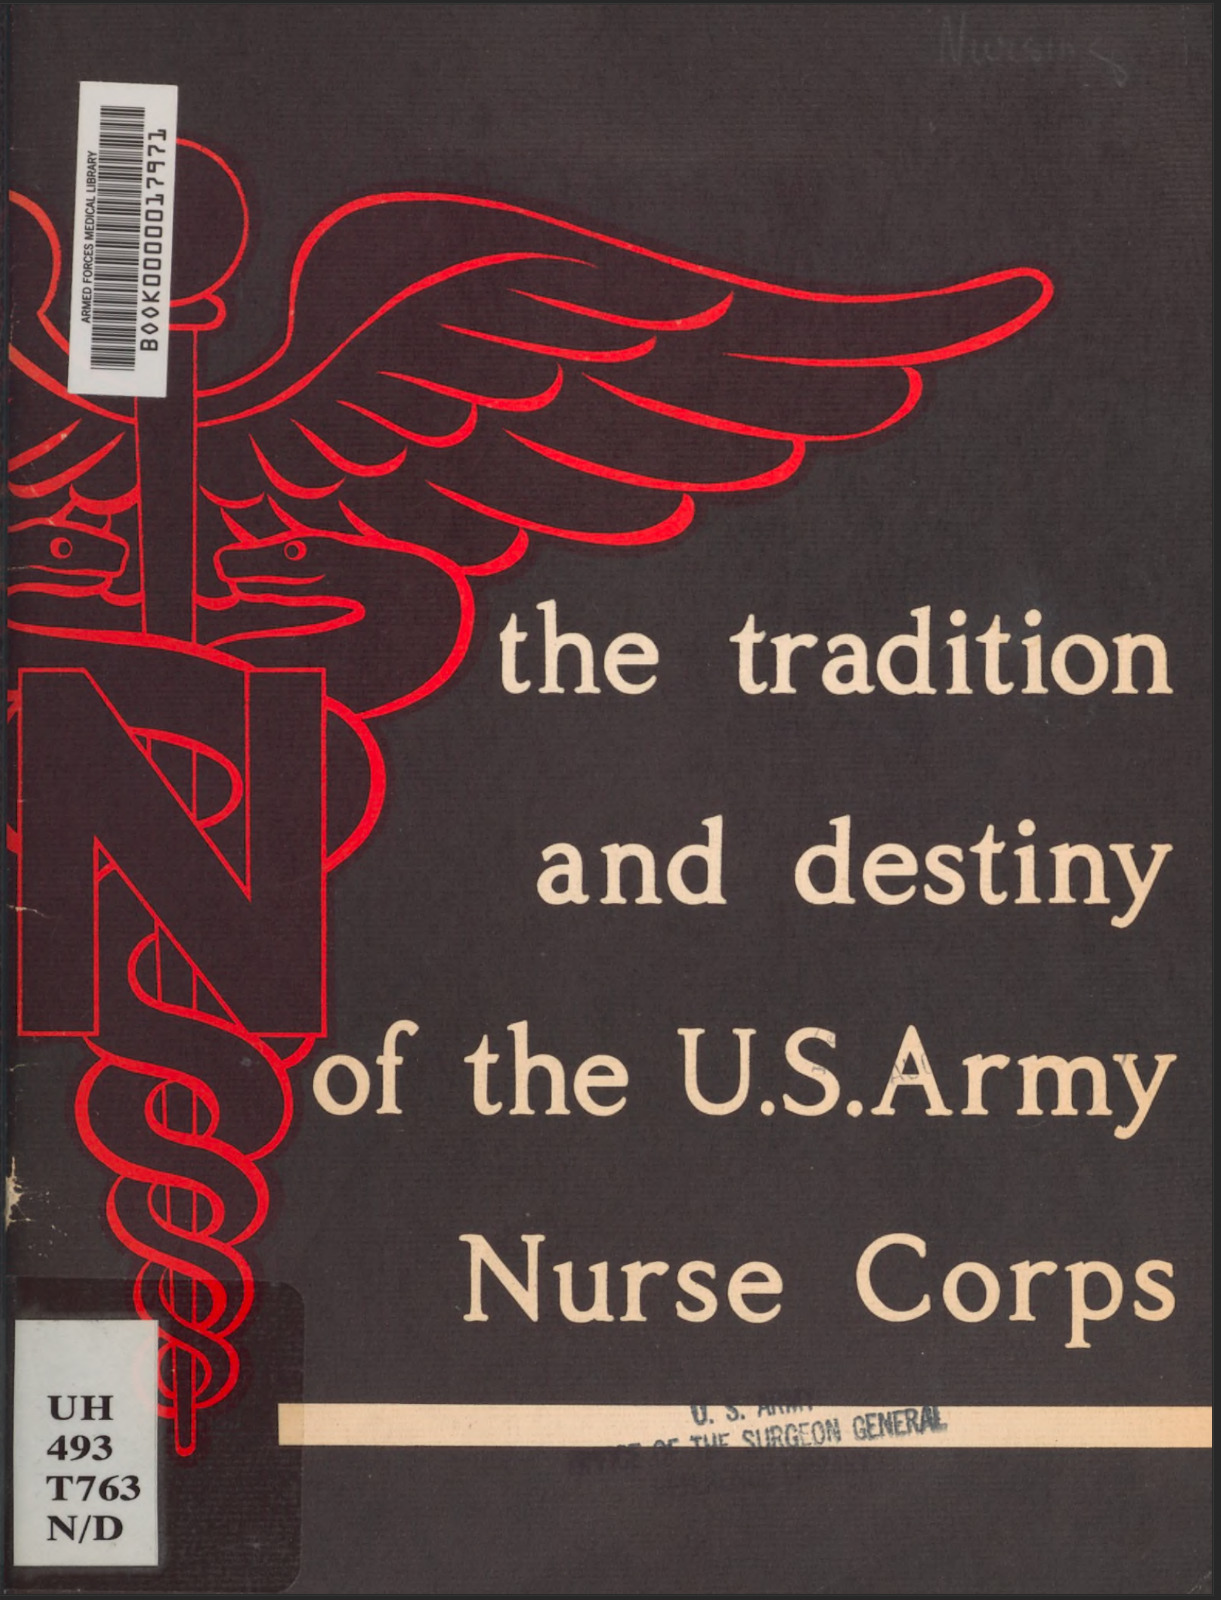 52 Page 1949 Tradition And Destiny Of The U.S. Army Nurse Corps Book On Data CD